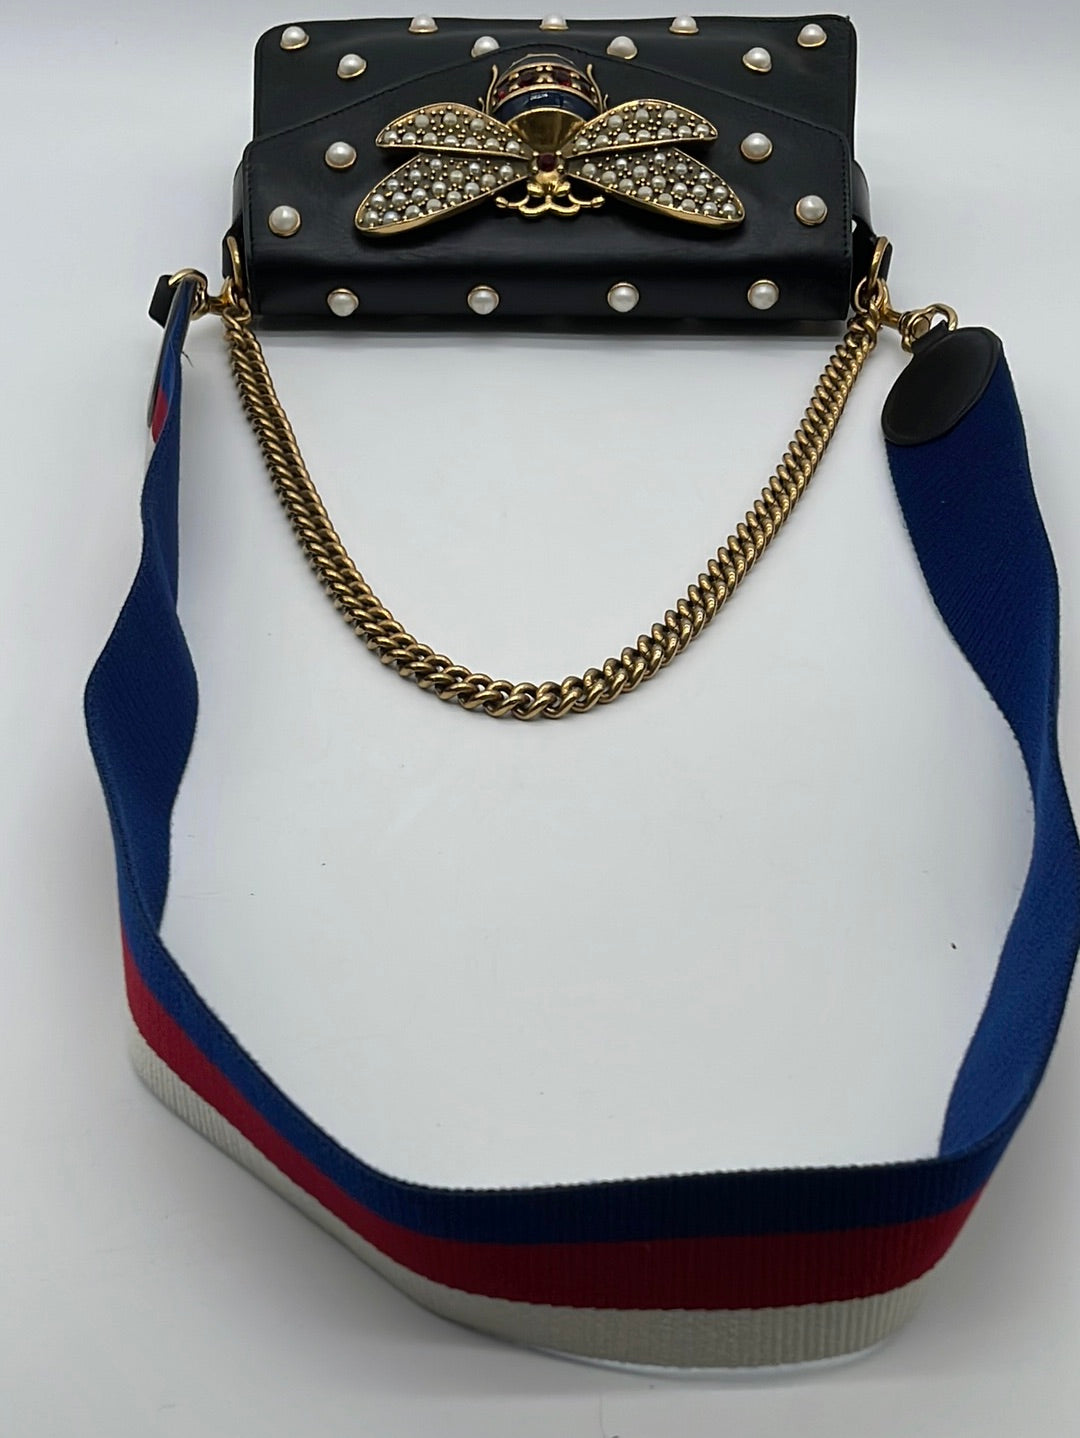 Gucci 'Broadway Pearly Bee' Shoulder Bag